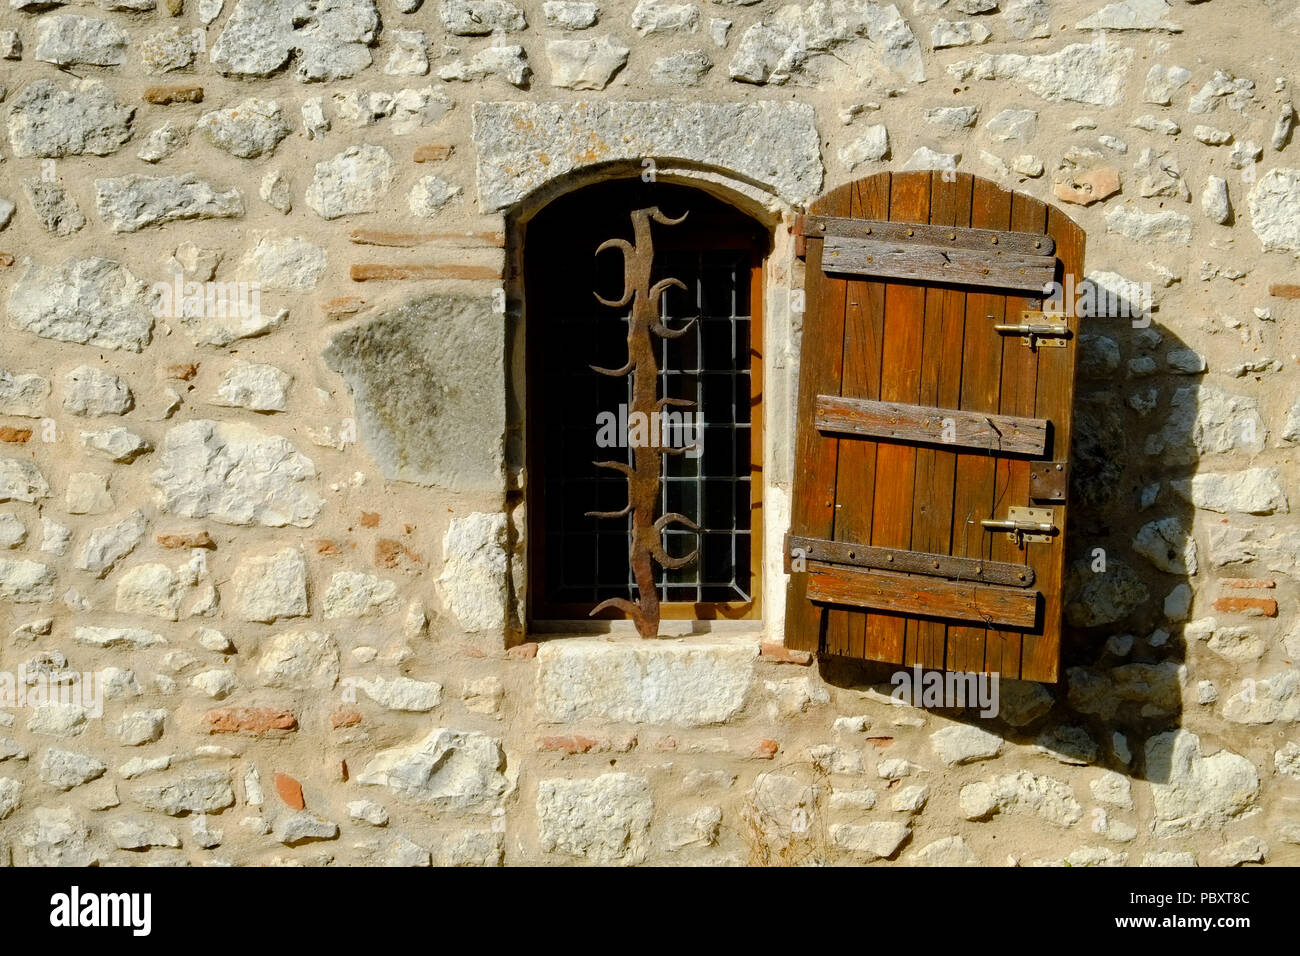 A rustic shuttered window with ornate security bars set in a stone wall in Pujols, Lot-et-Garonne, France. This historic village is a member of 'Les Plus Beaux Villages de France' association. Stock Photo